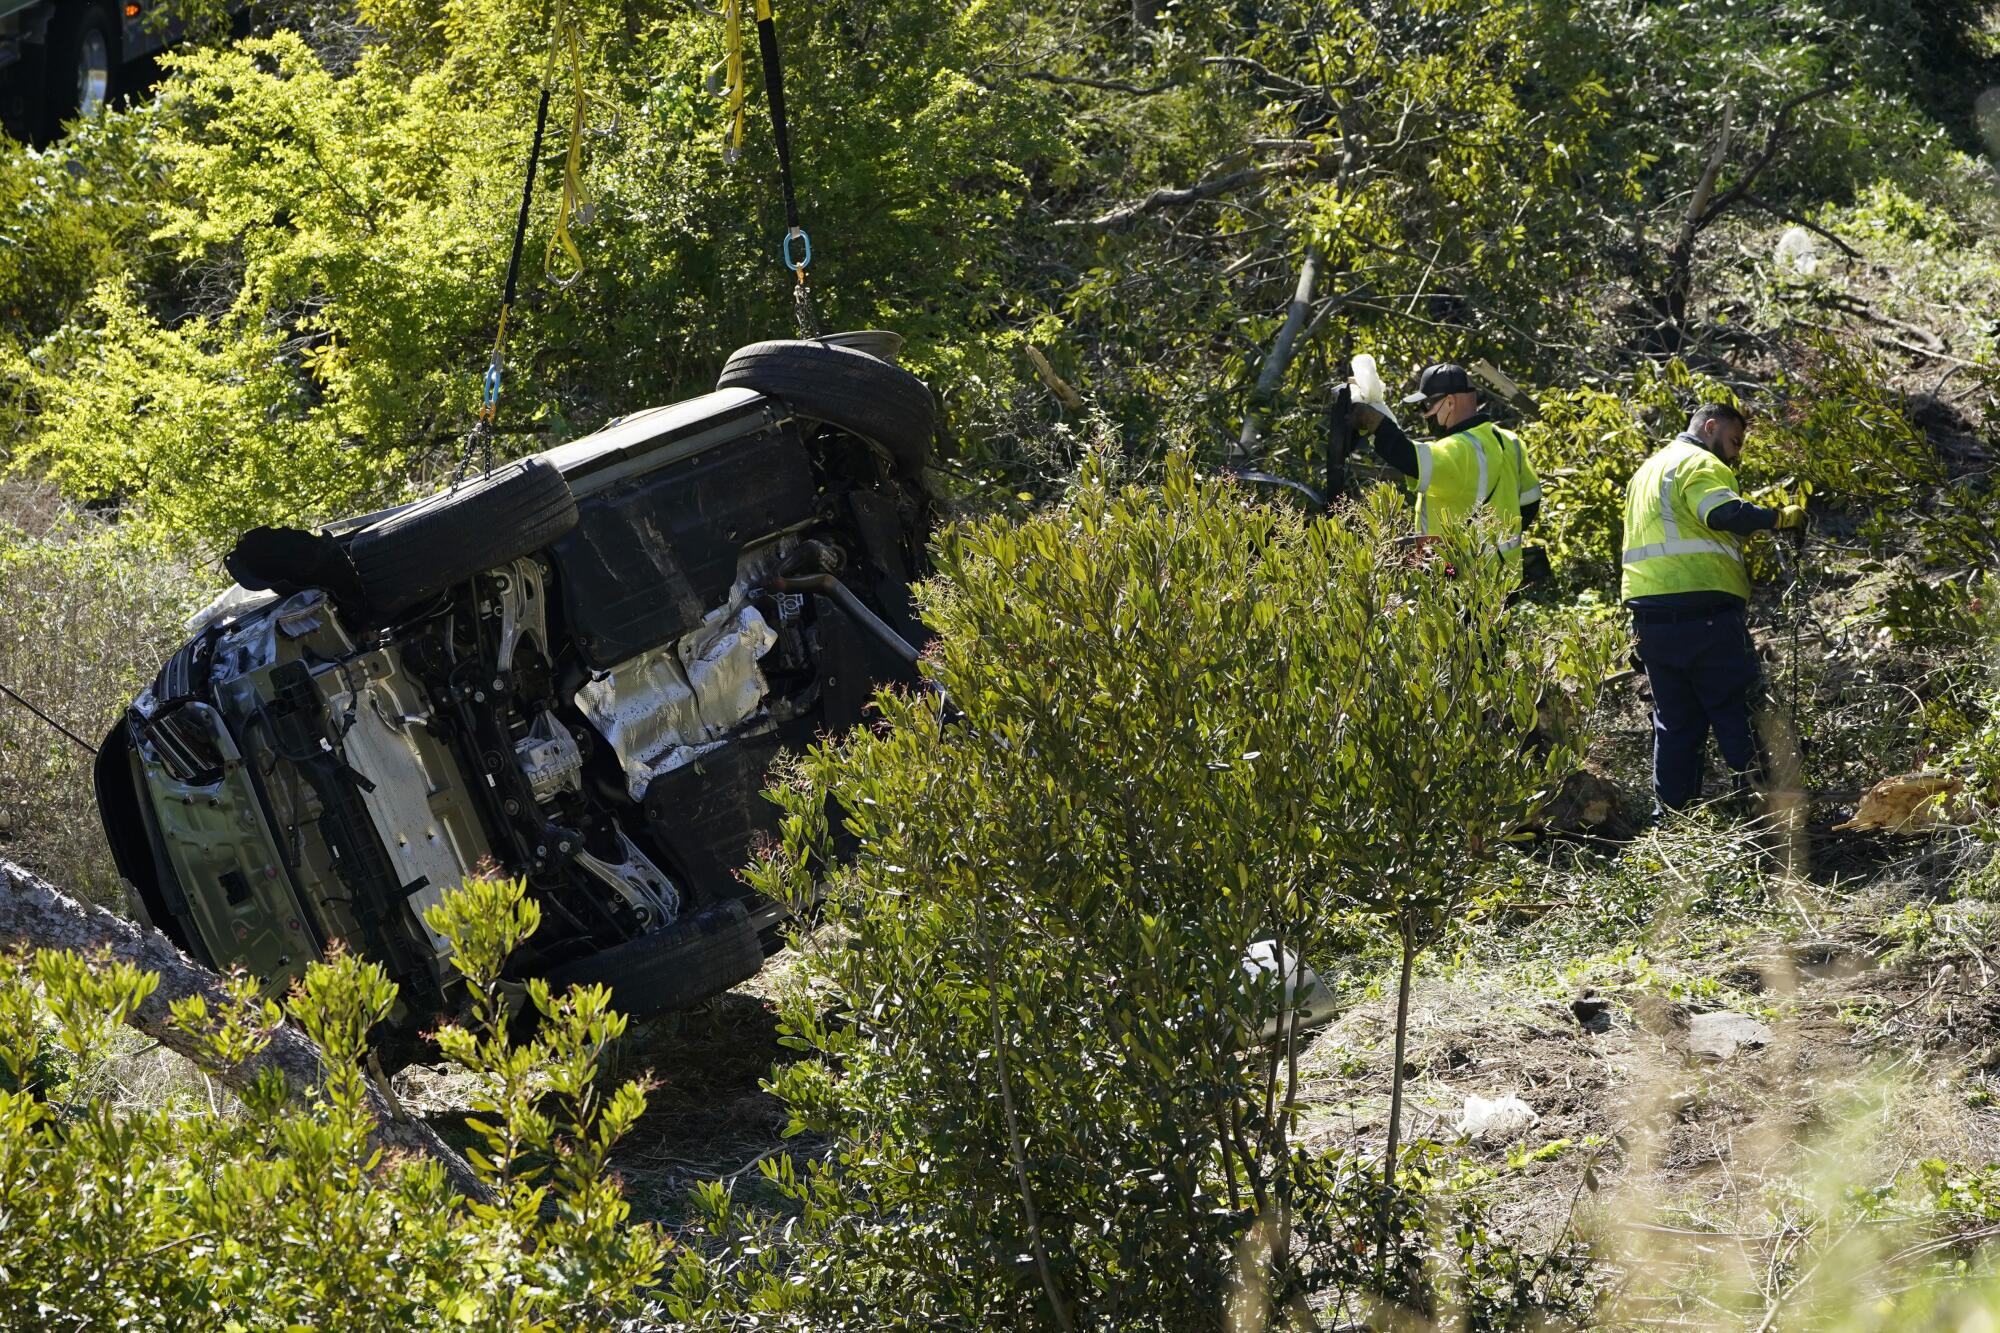 Workers collect debris beside a vehicle after a rollover accident involving golfer Tiger Woods Tuesday 